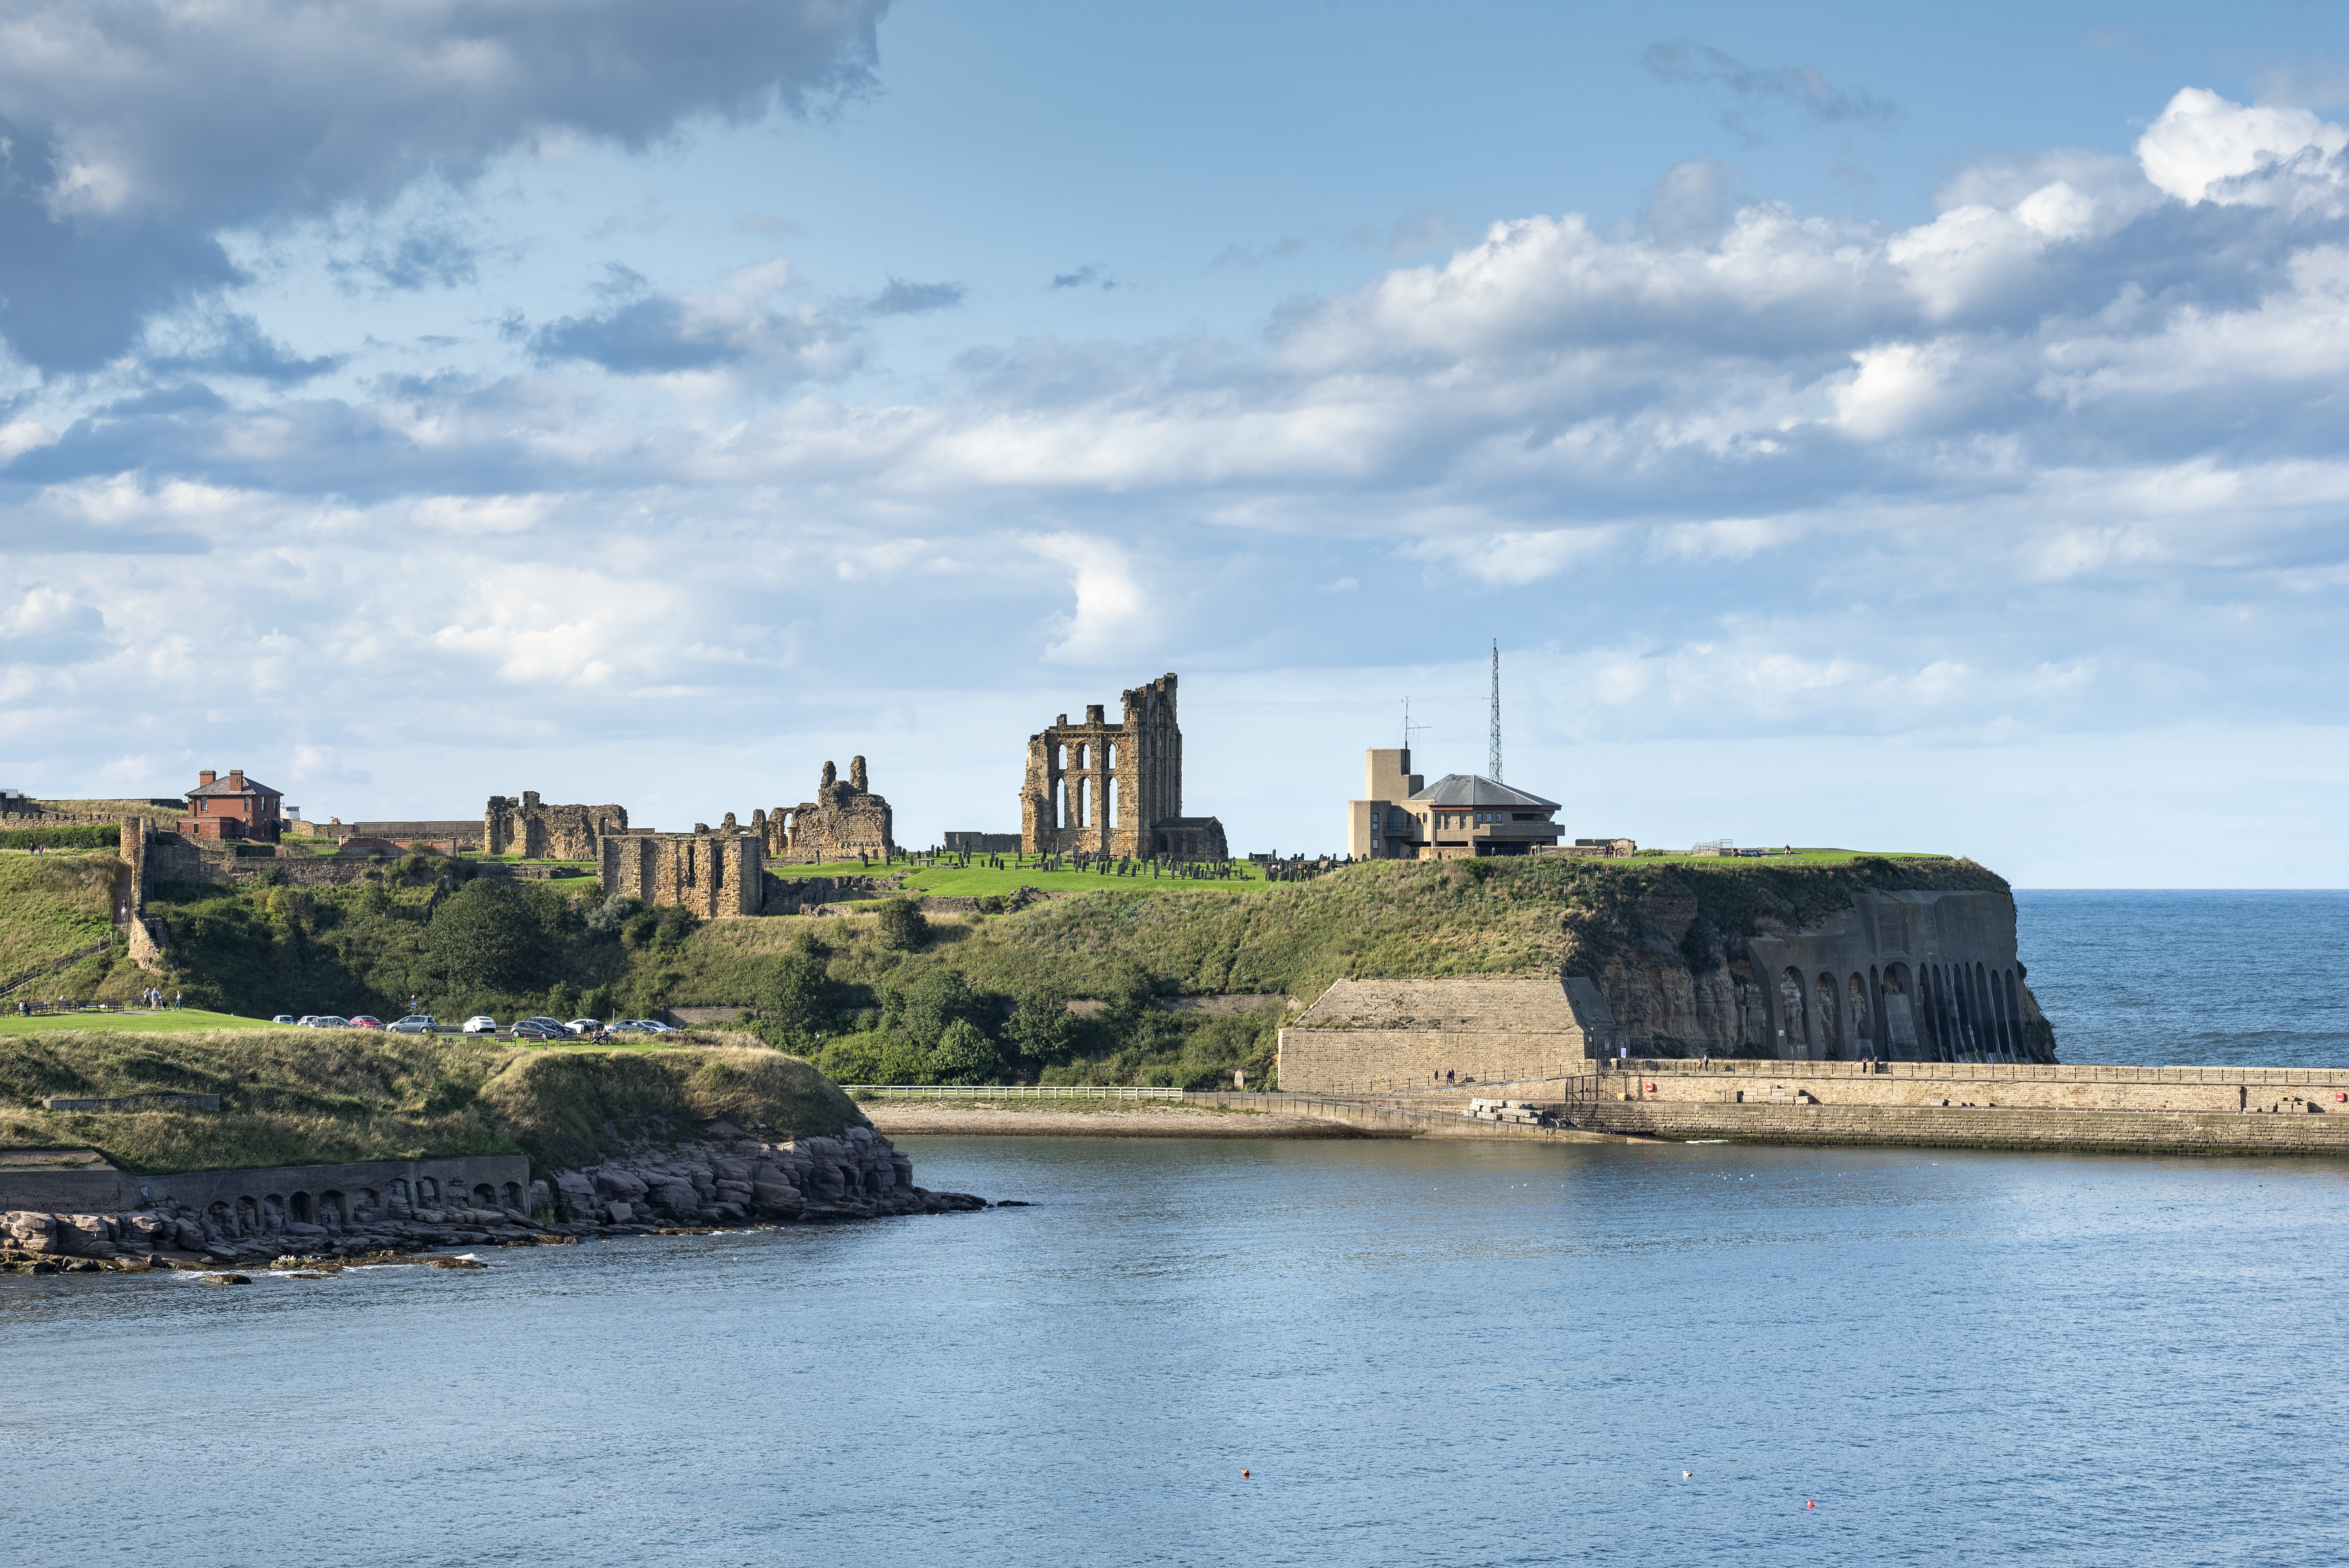 View of the Monastery of Tynemouth and coastguard station, North Sea